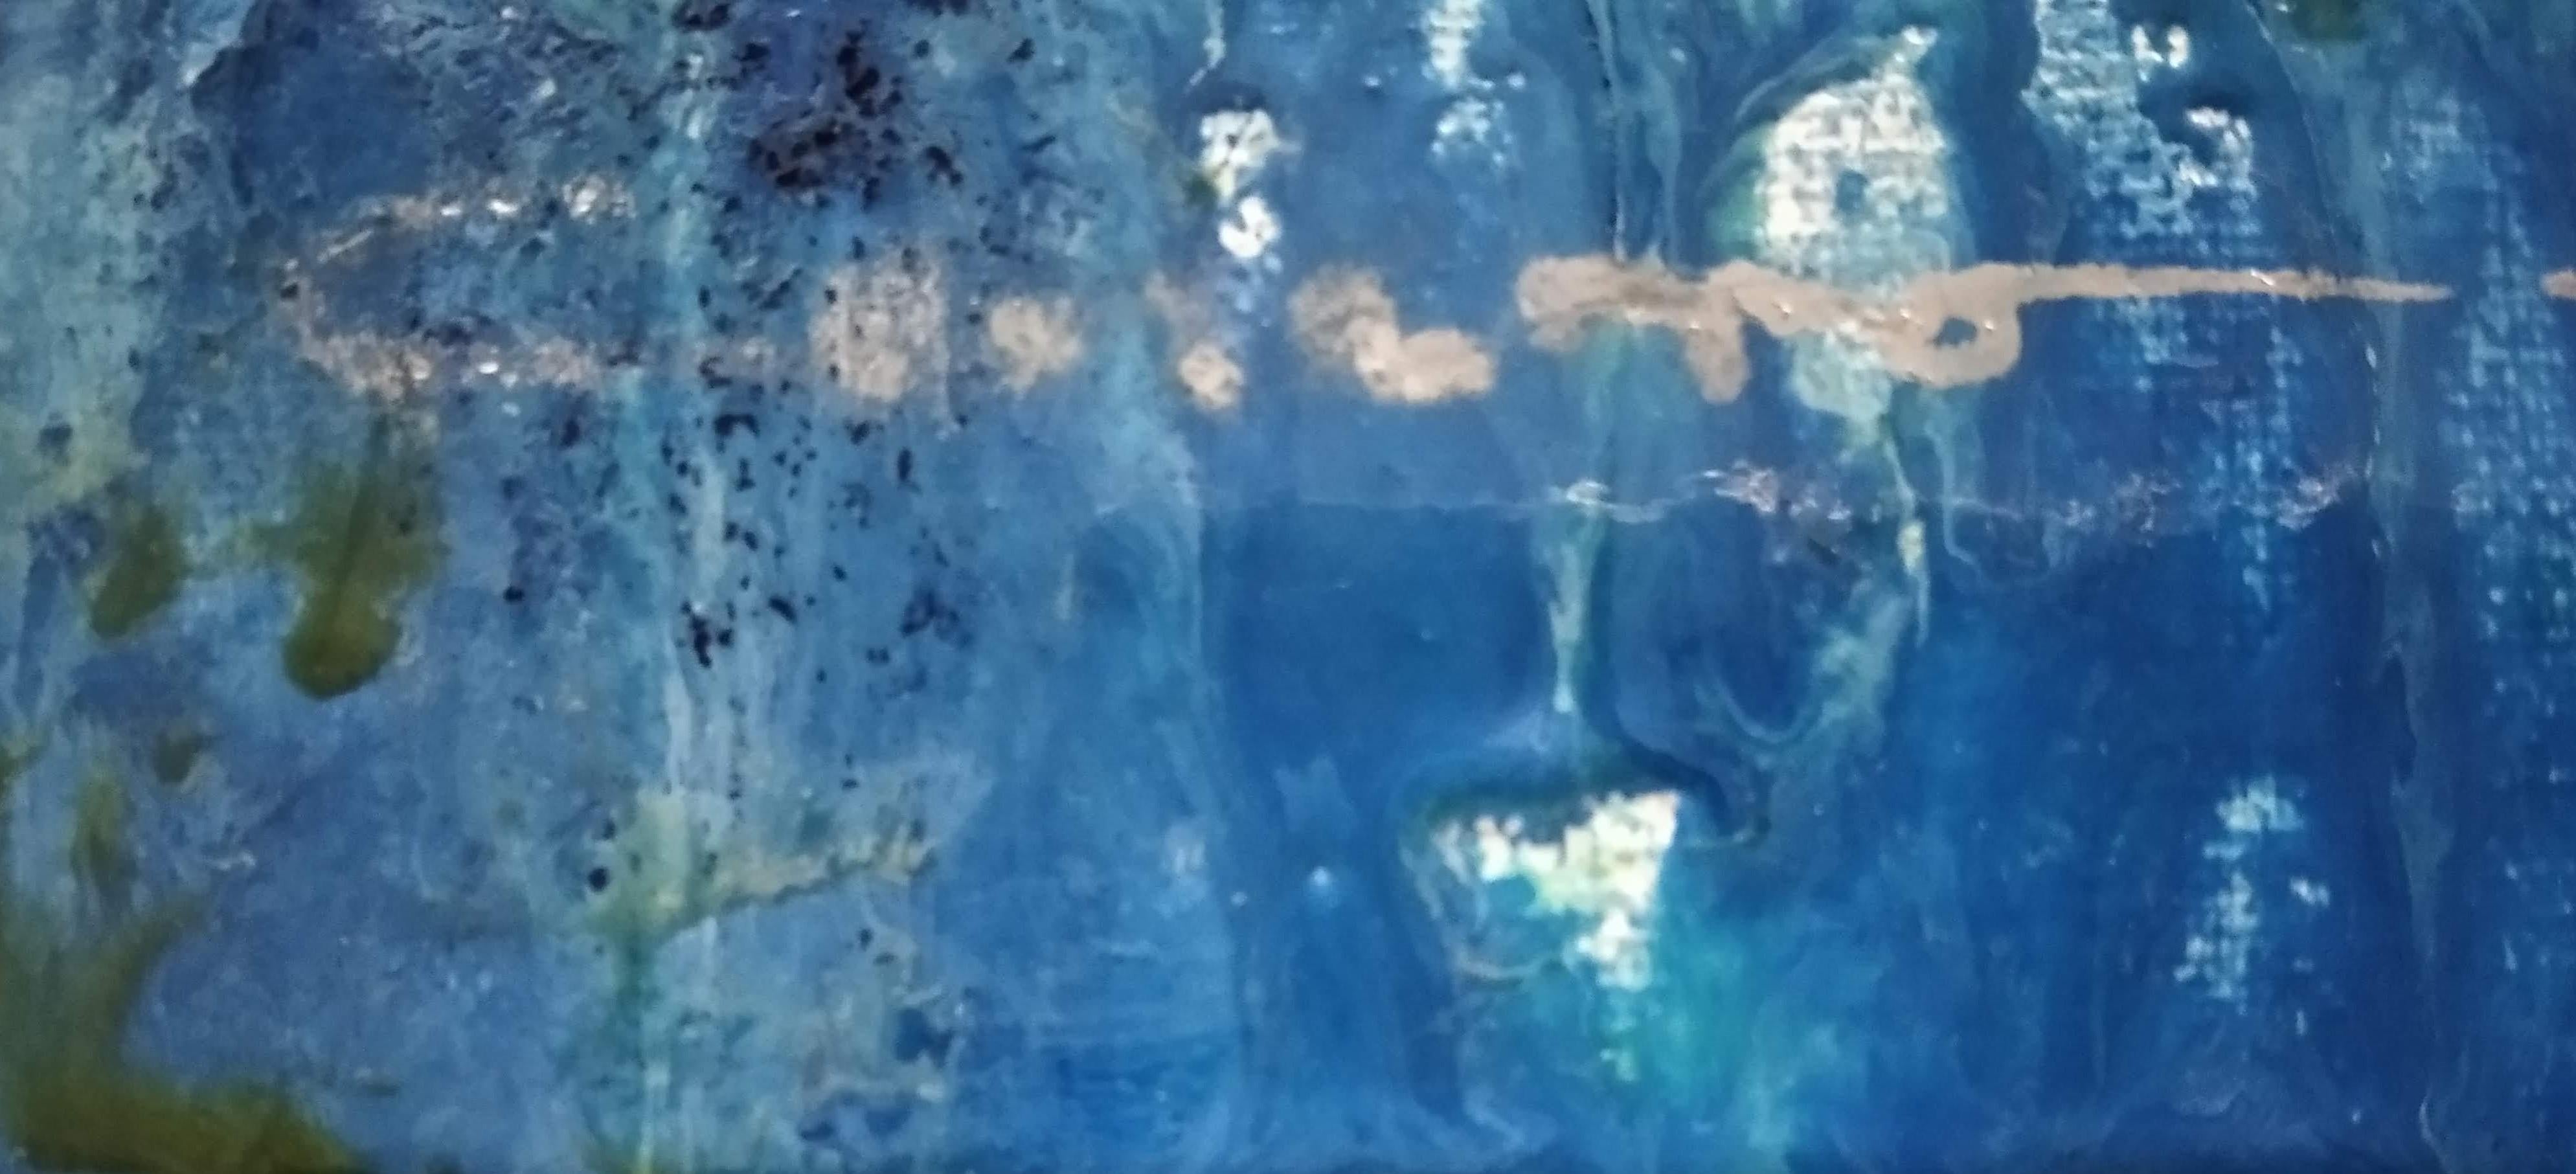 Untitled - Blue Abstract Painting by Elena Cenarro 